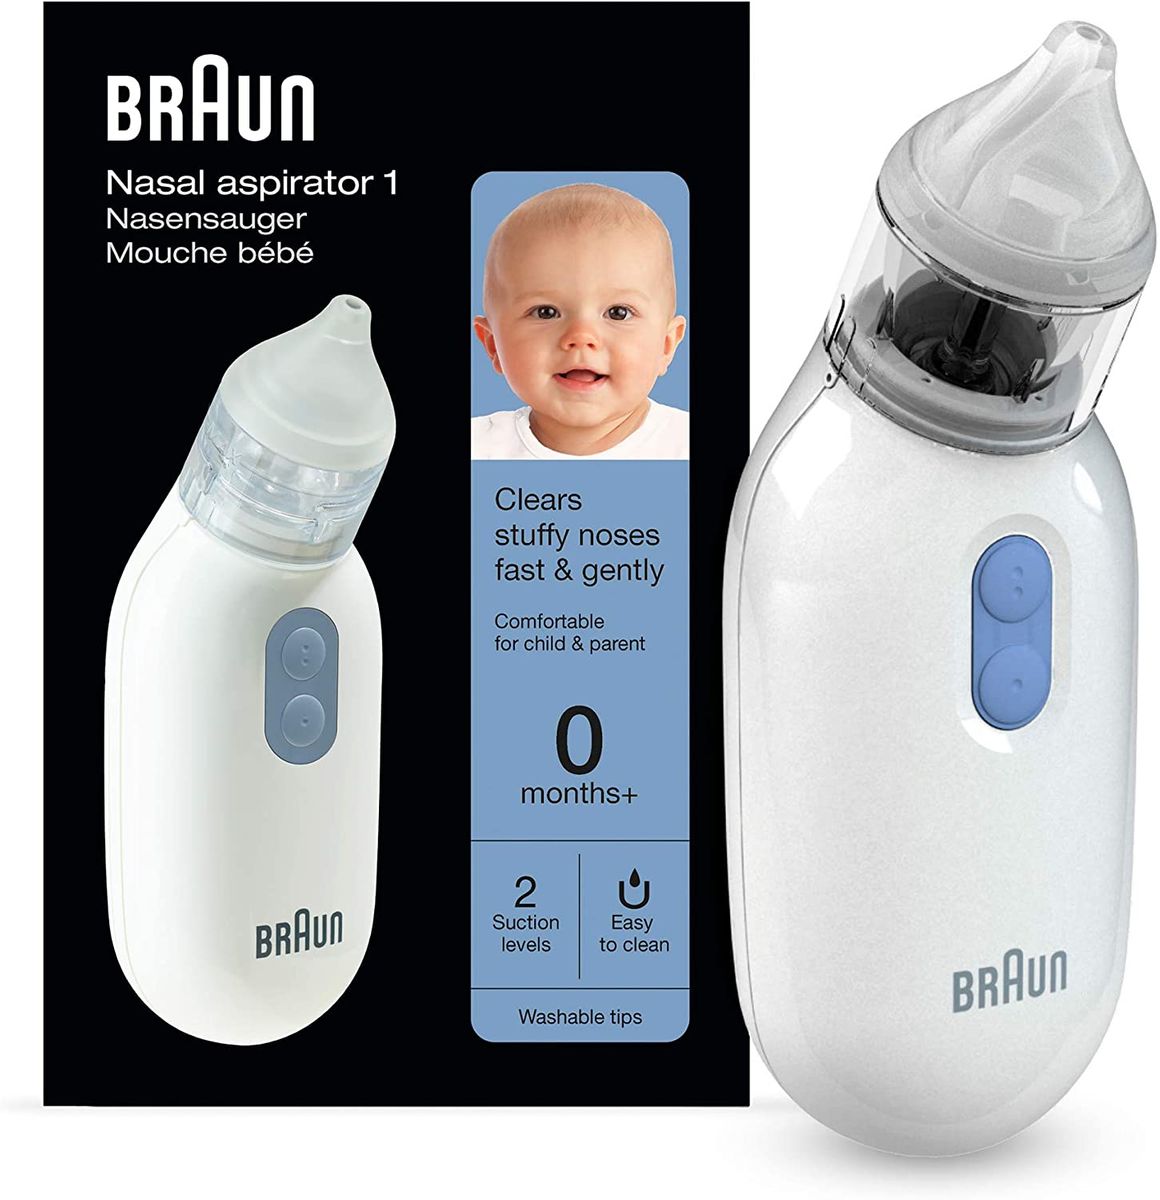 Braun Nasal aspirator 1, BNA100EU. Frees blocked noses quickly and gently. Electric nasal aspirator for all ages